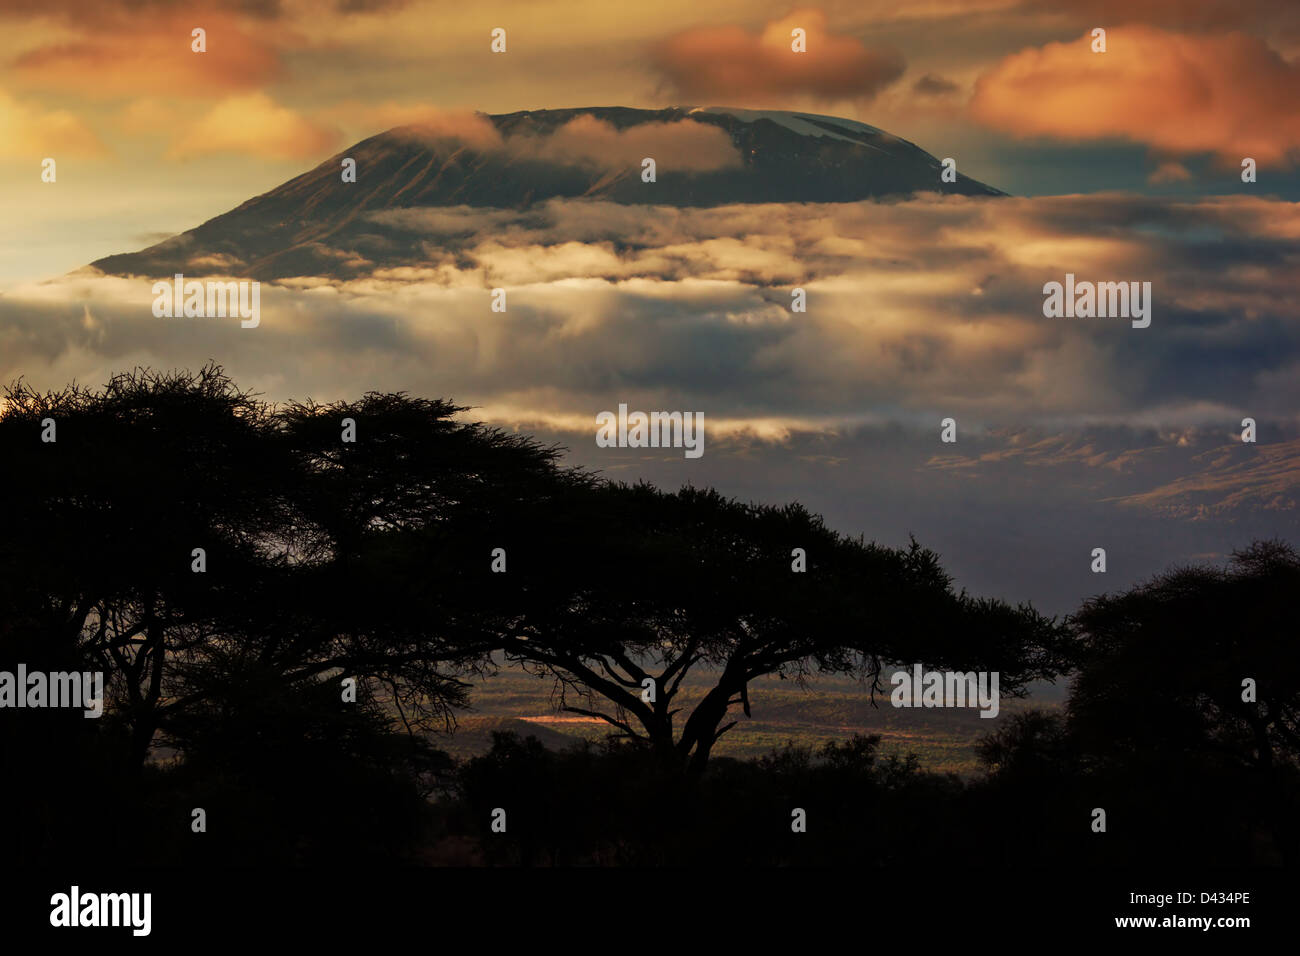 Africa landscape - Mount Kilimanjaro and clouds line at sunset, view from savanna landscape in Amboseli, Kenya, Africa Stock Photo